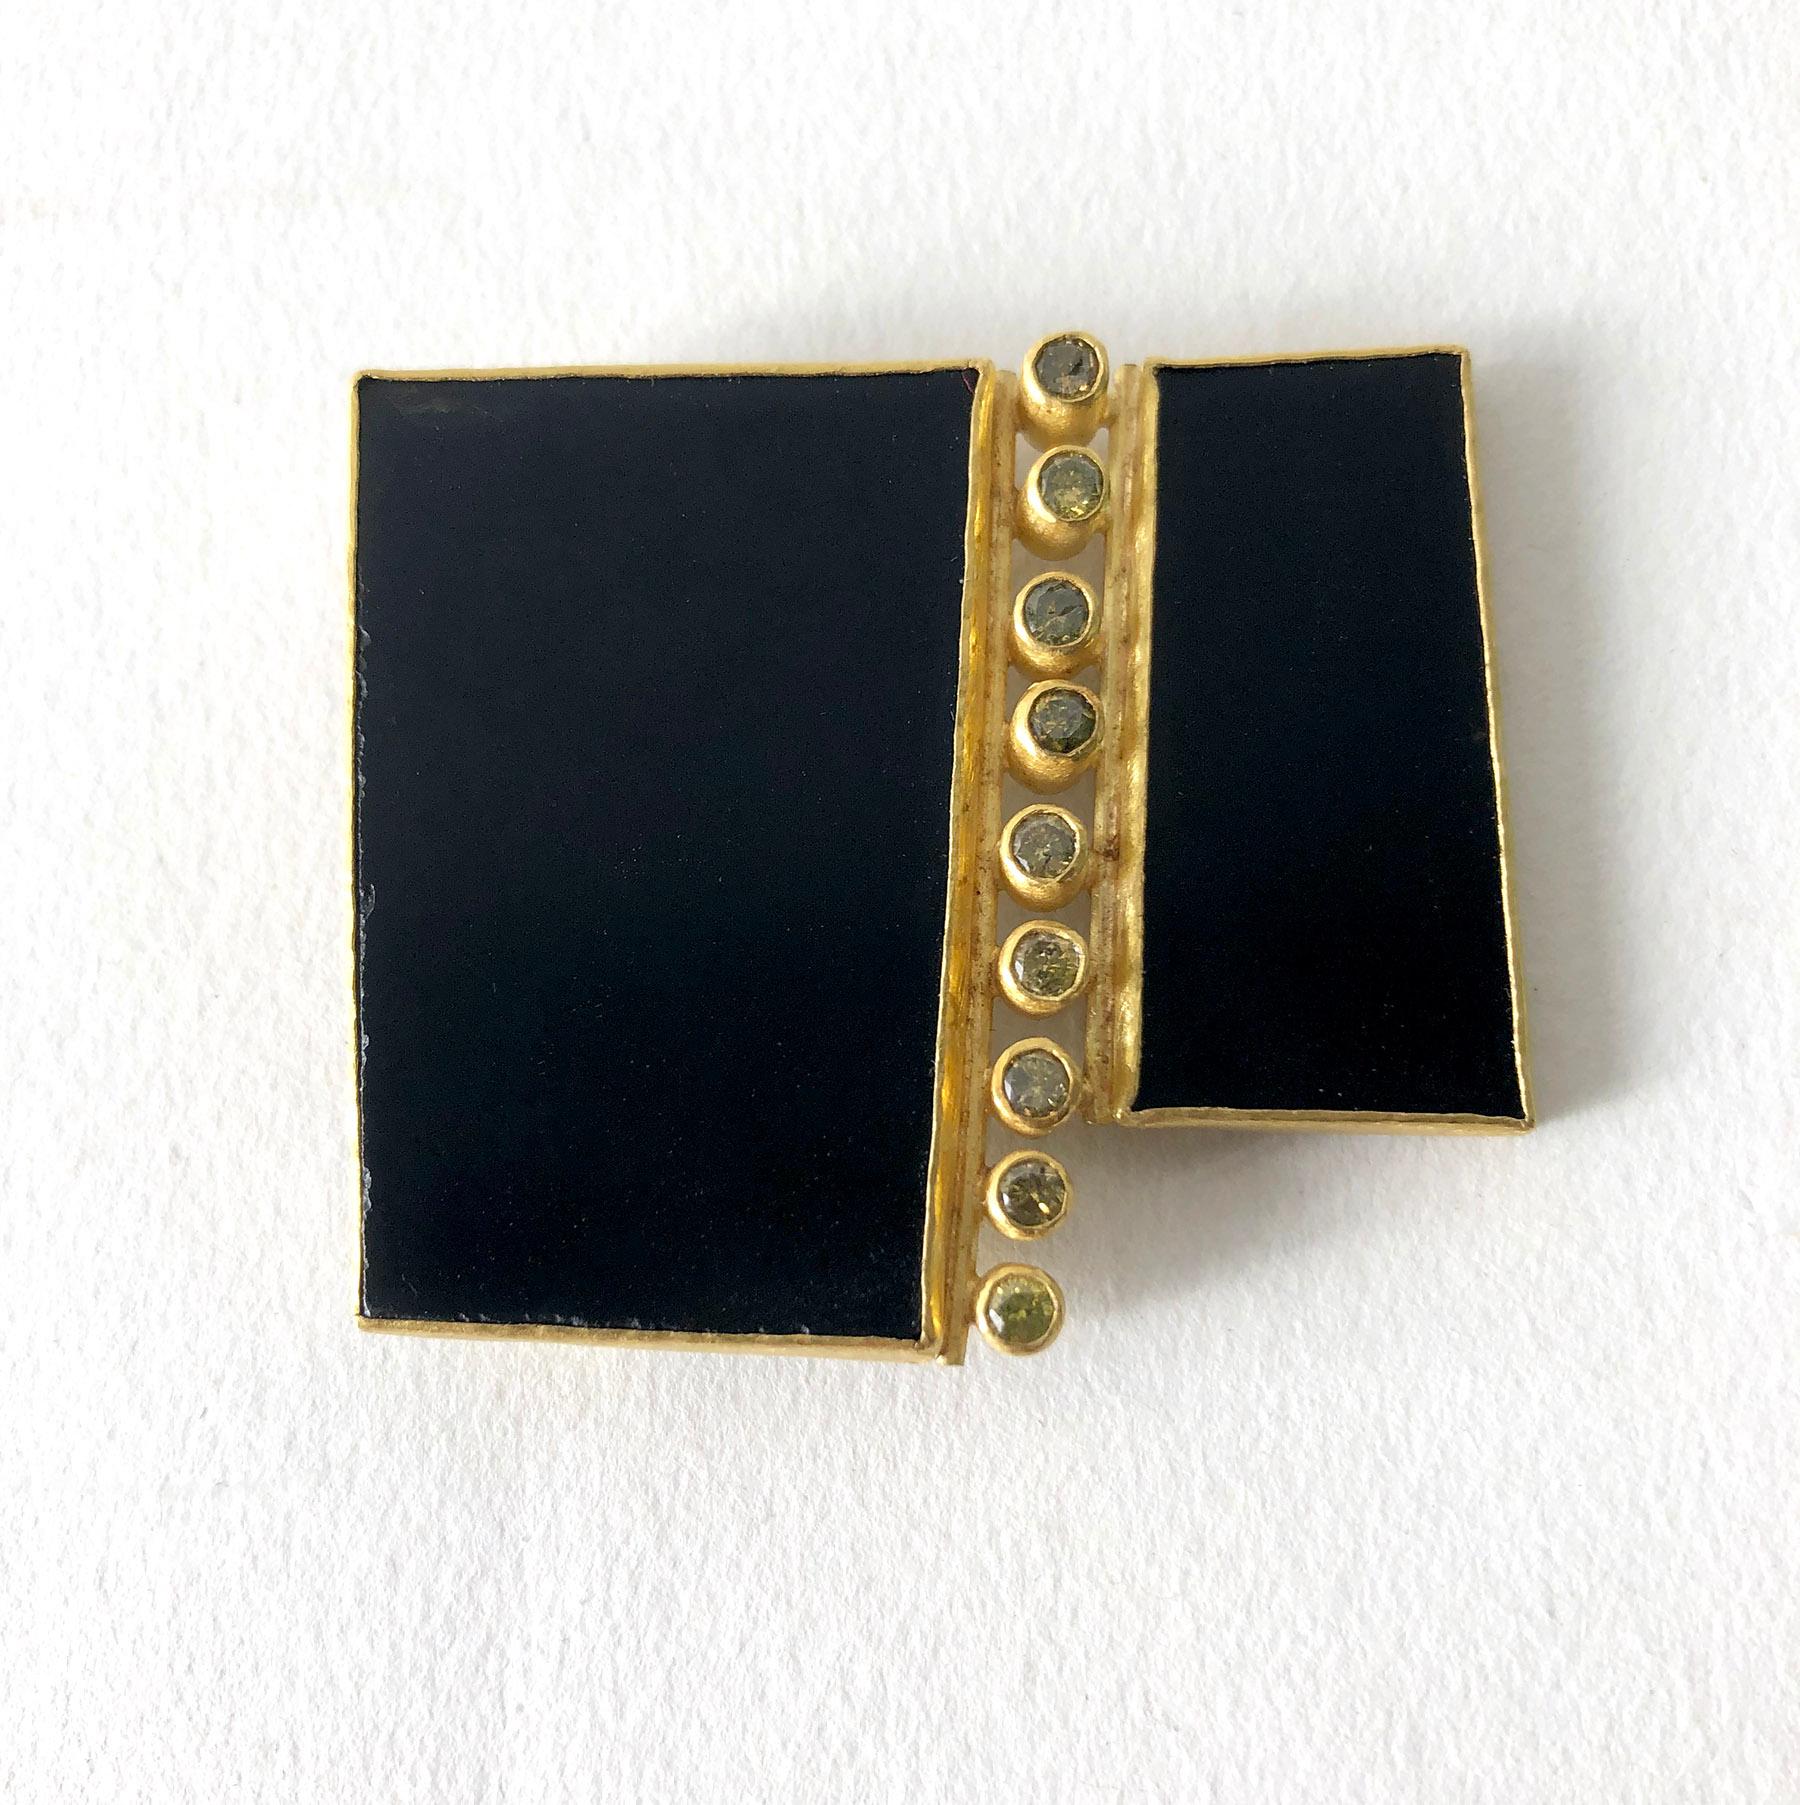 Contemporary 18k gold, onyx and semi precious gemstones pendant/brooch, by German born Petra Class. Class is a classically trained goldsmith who founded a small jewelry design studio in San Francisco in 1991.  Pendant brooch measures 1.75